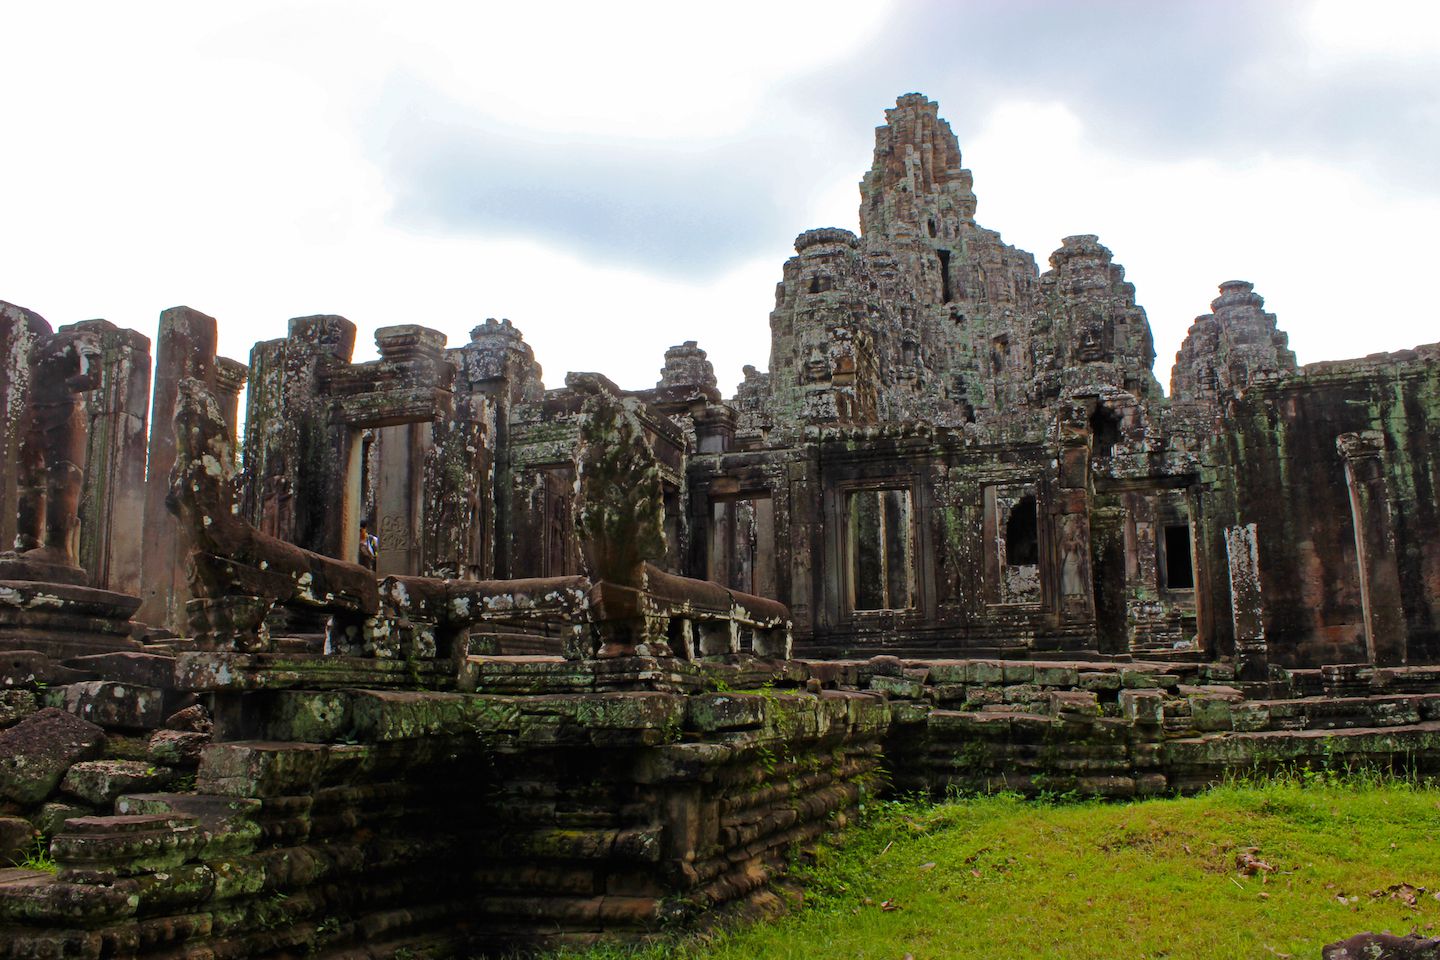 View of the entrance to the Bayon